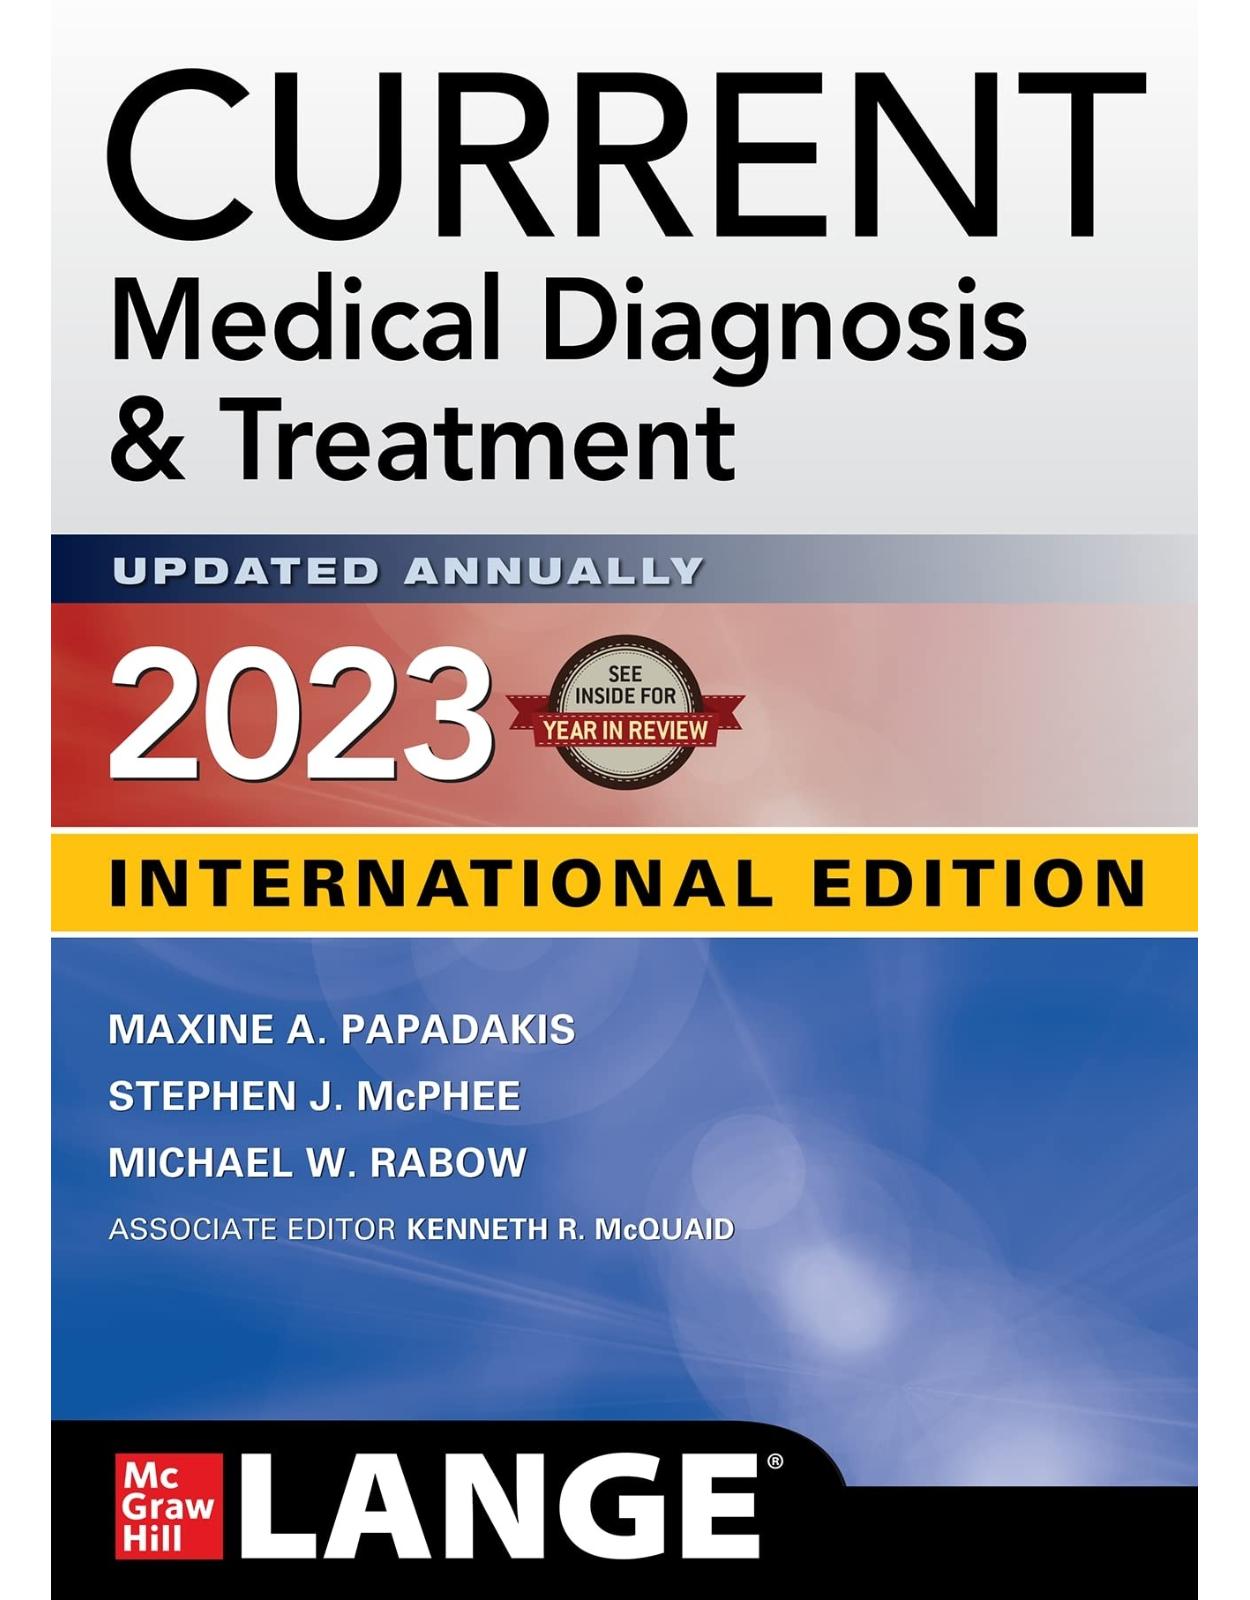 Ie Current Medical Diagnosis And Treatment 2023